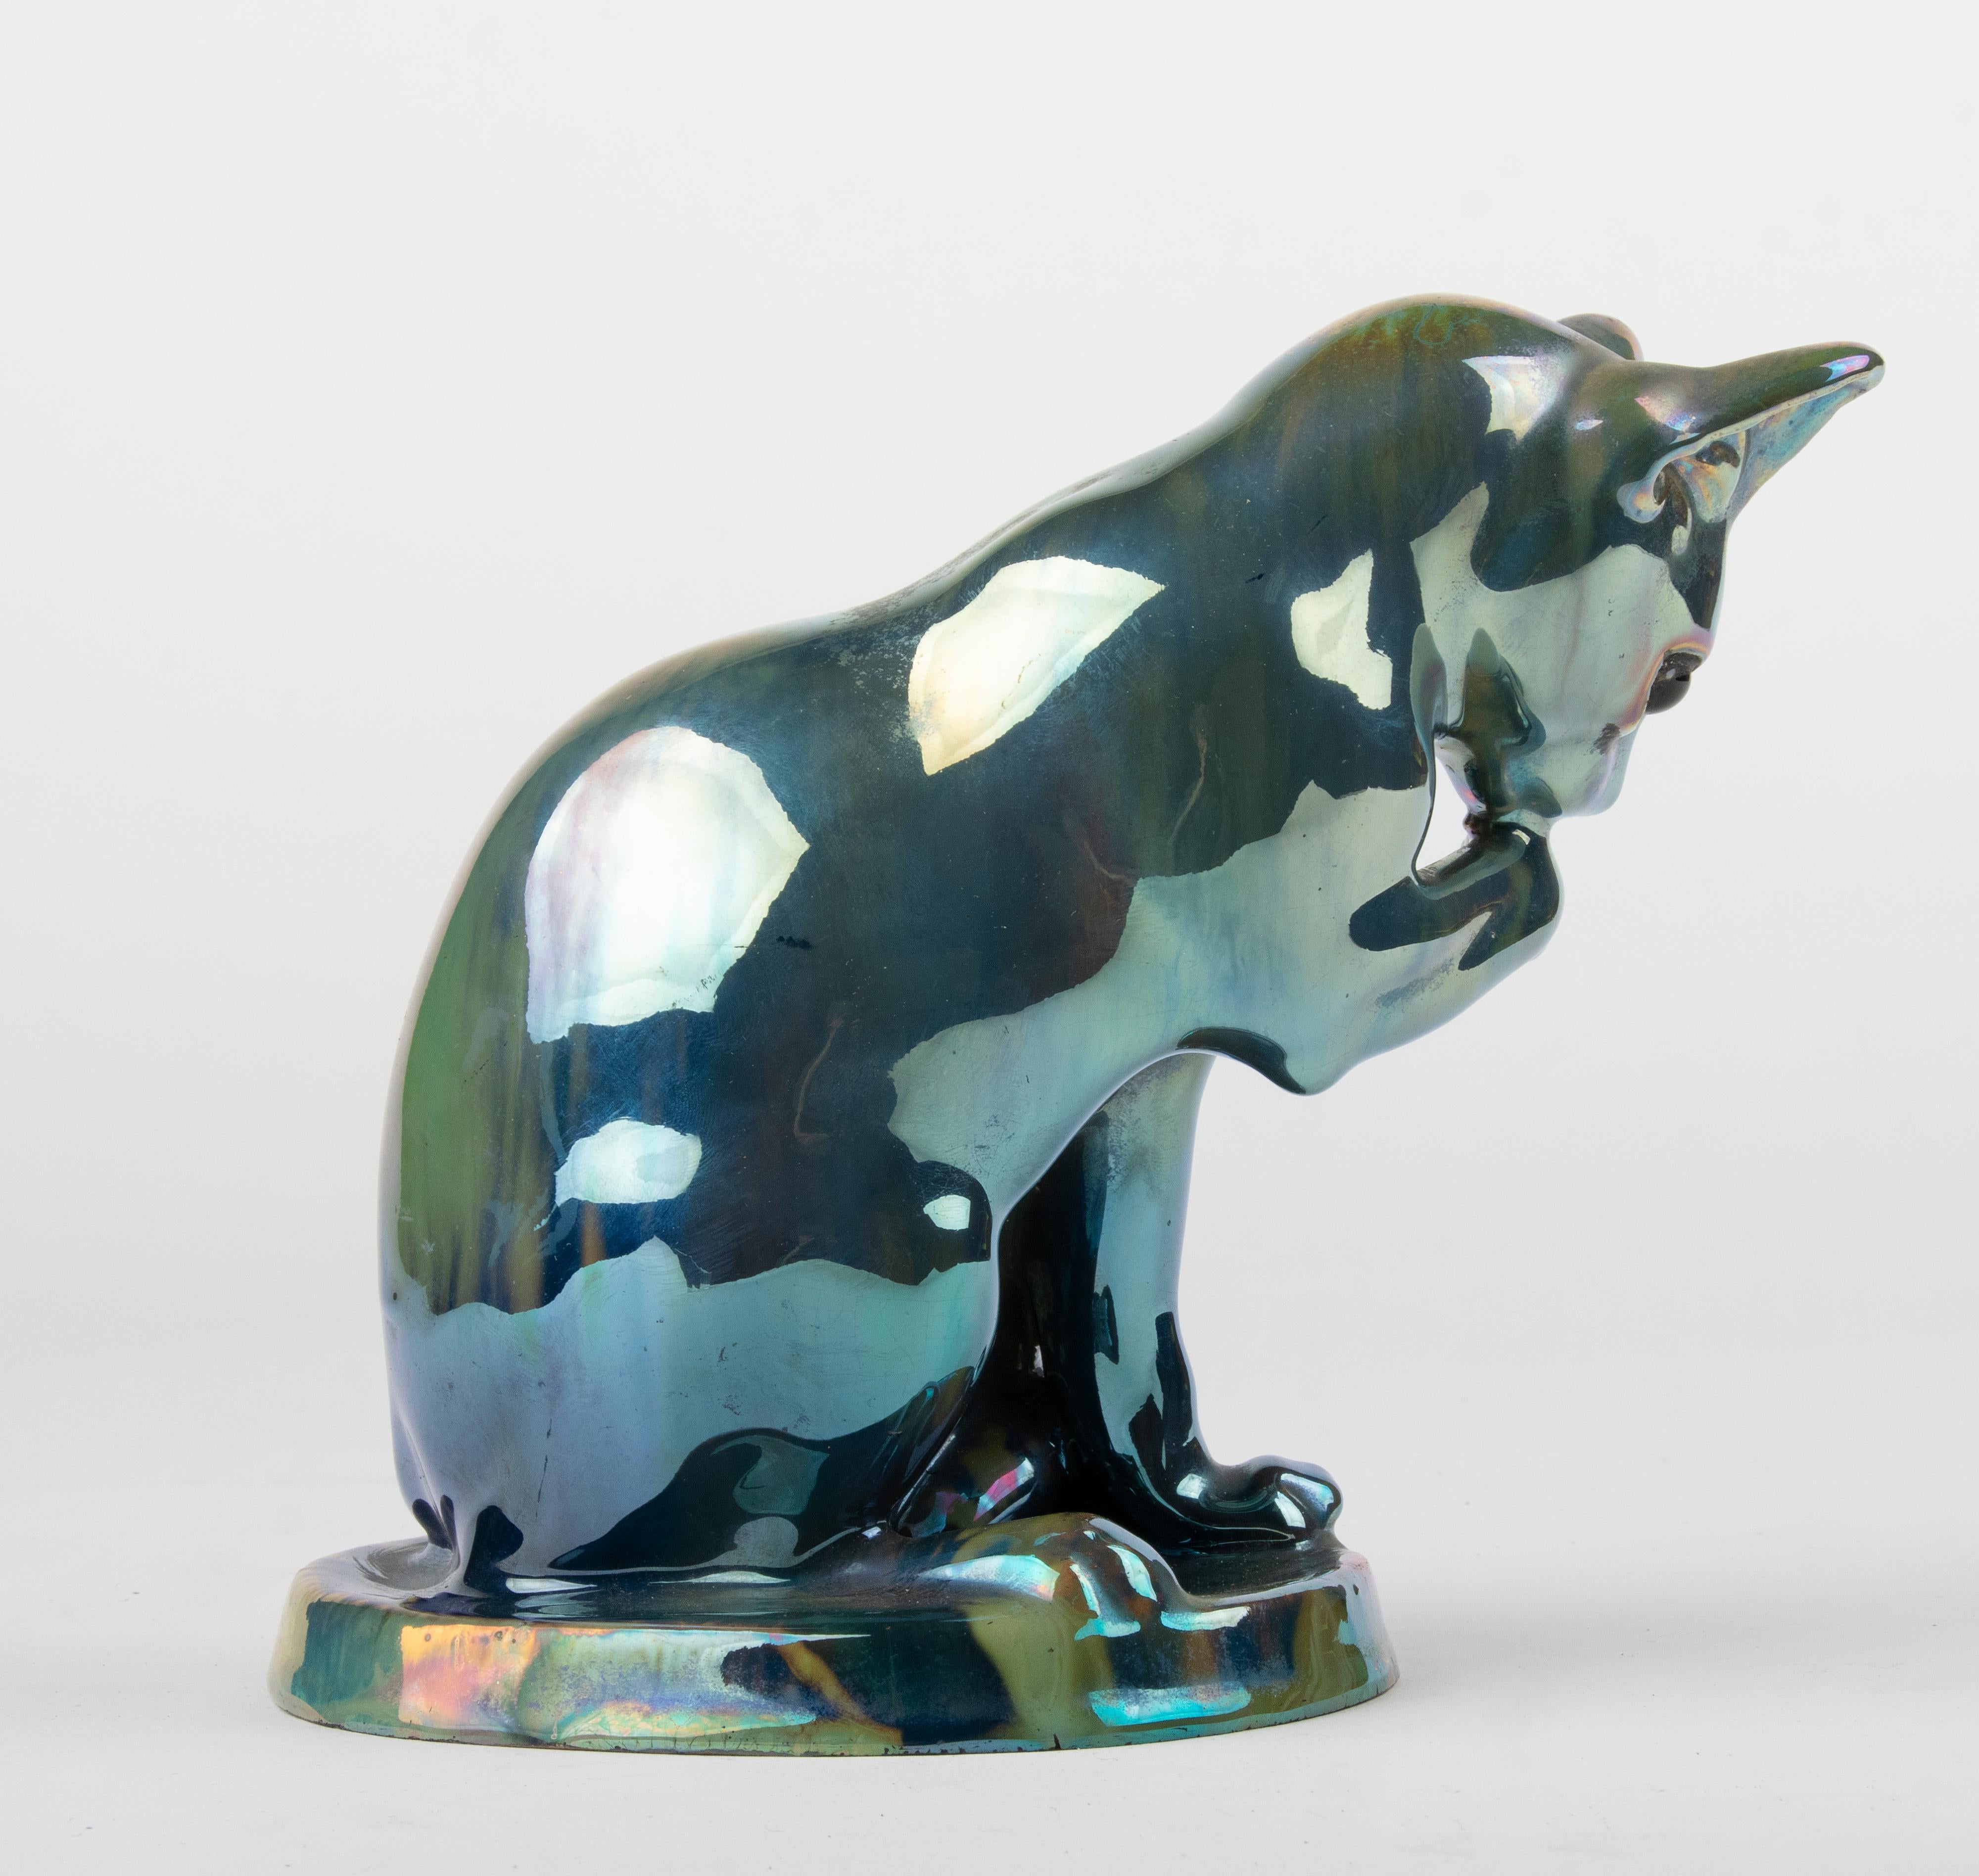 Hand-Crafted 1930's Ceramic Cat Figure with Iridescent Glaze, Alph. Cytère Rambervilliers For Sale